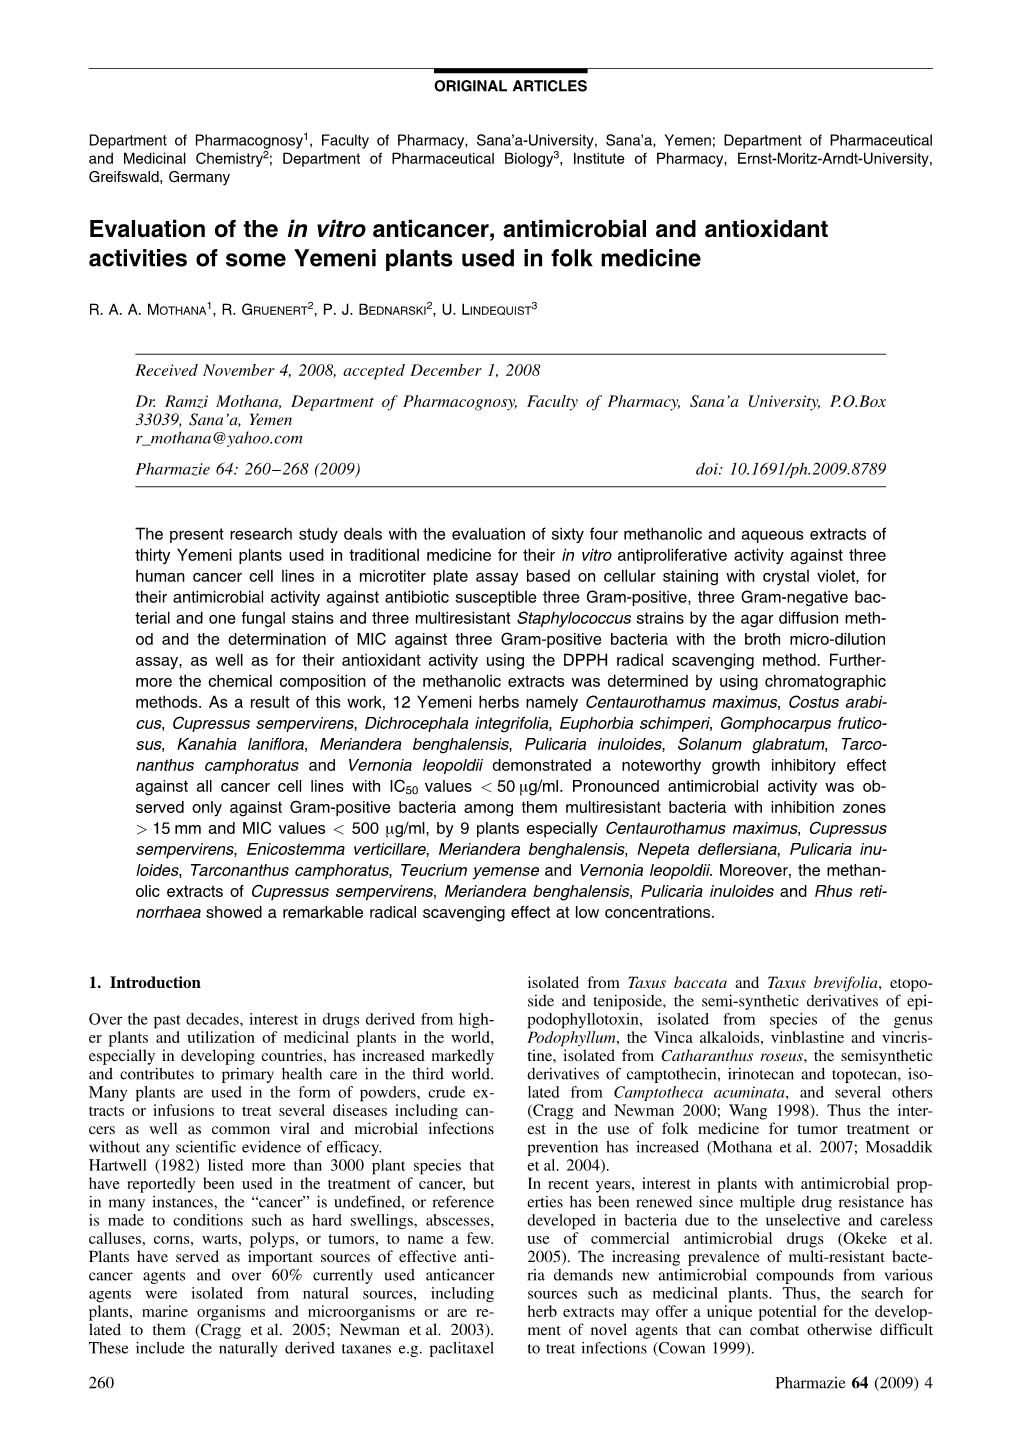 Evaluation of the in Vitro Anticancer, Antimicrobial and Antioxidant Activities of Some Yemeni Plants Used in Folk Medicine